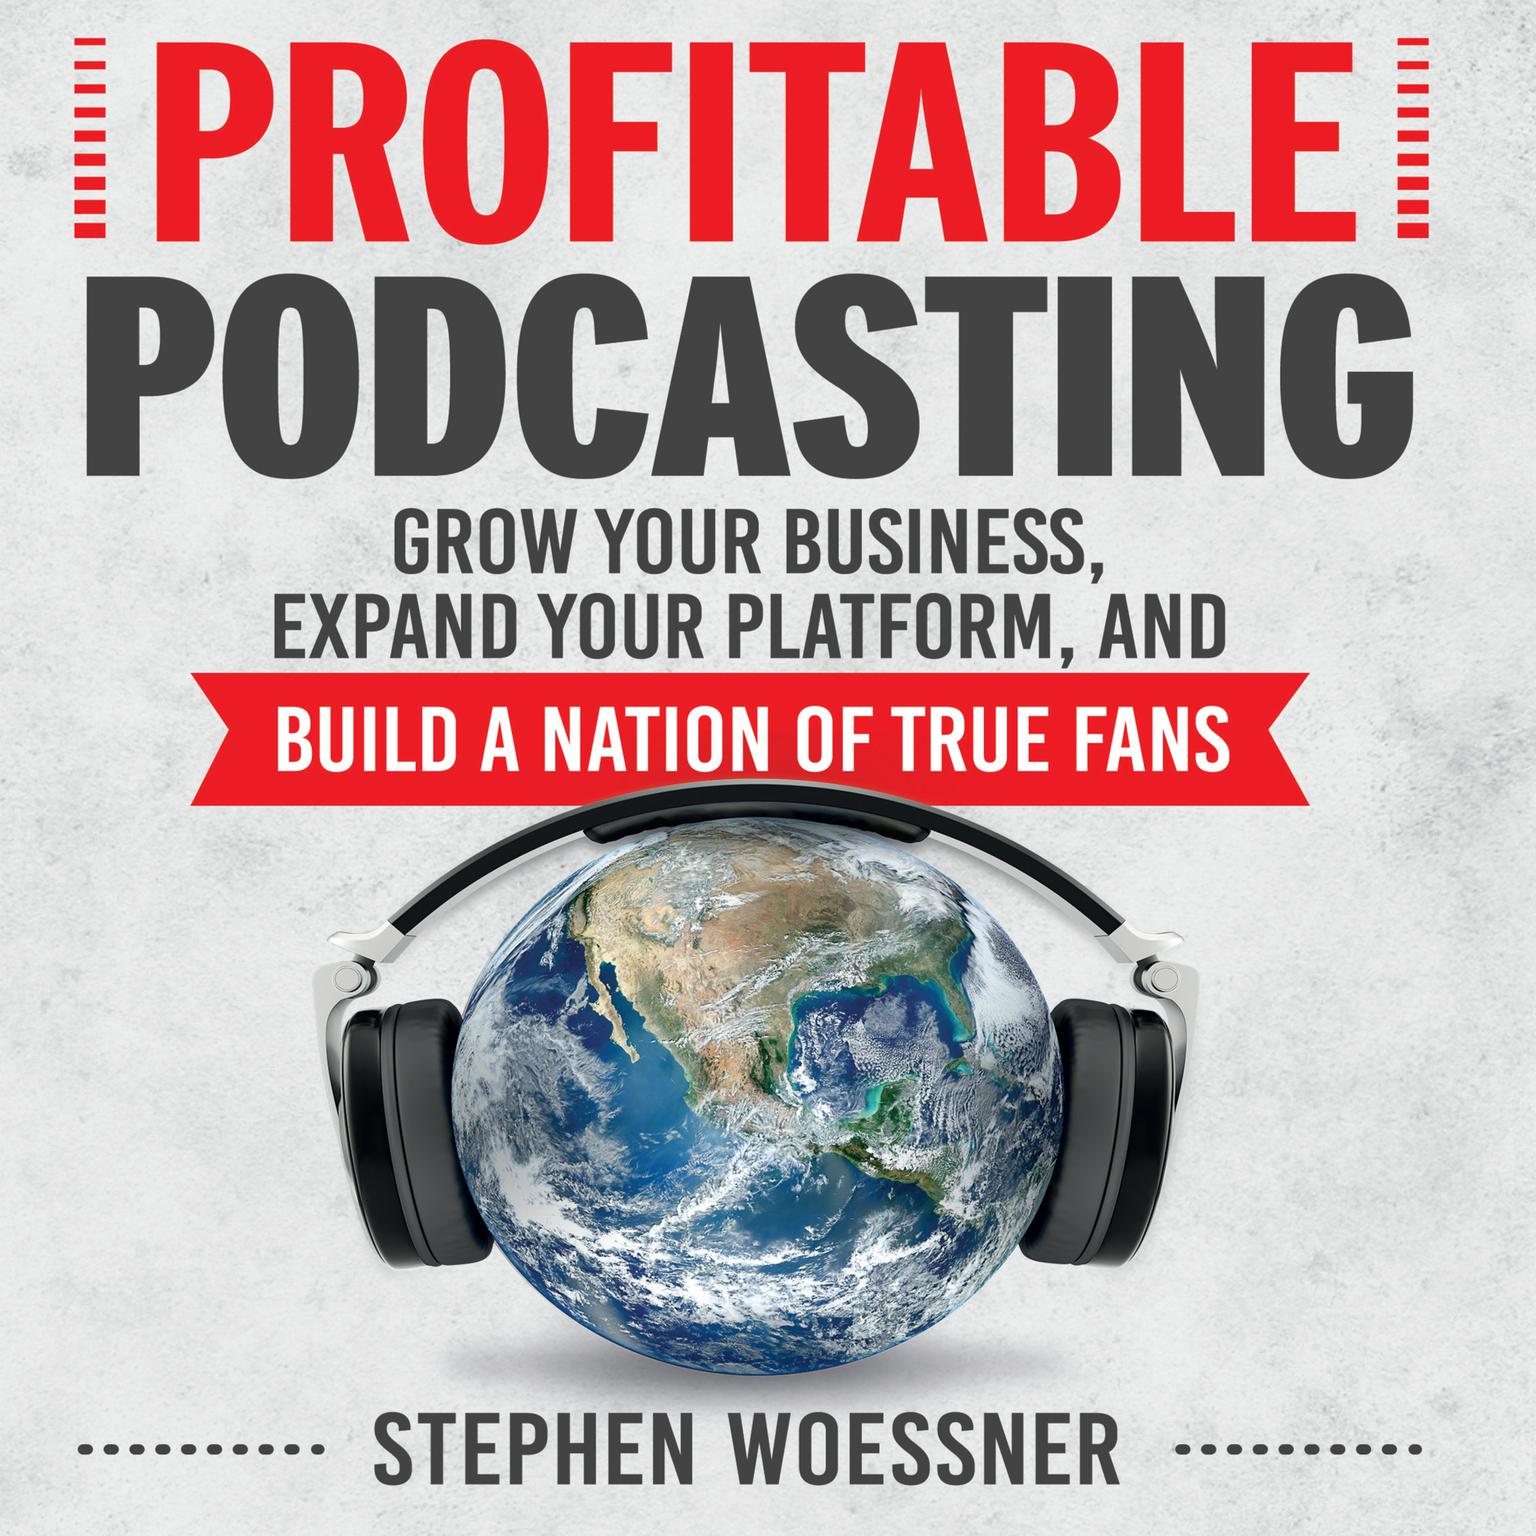 Profitable Podcasting: Grow Your Business, Expand Your Platform, and Build a Nation of True Fans Audiobook, by Stephen Woessner